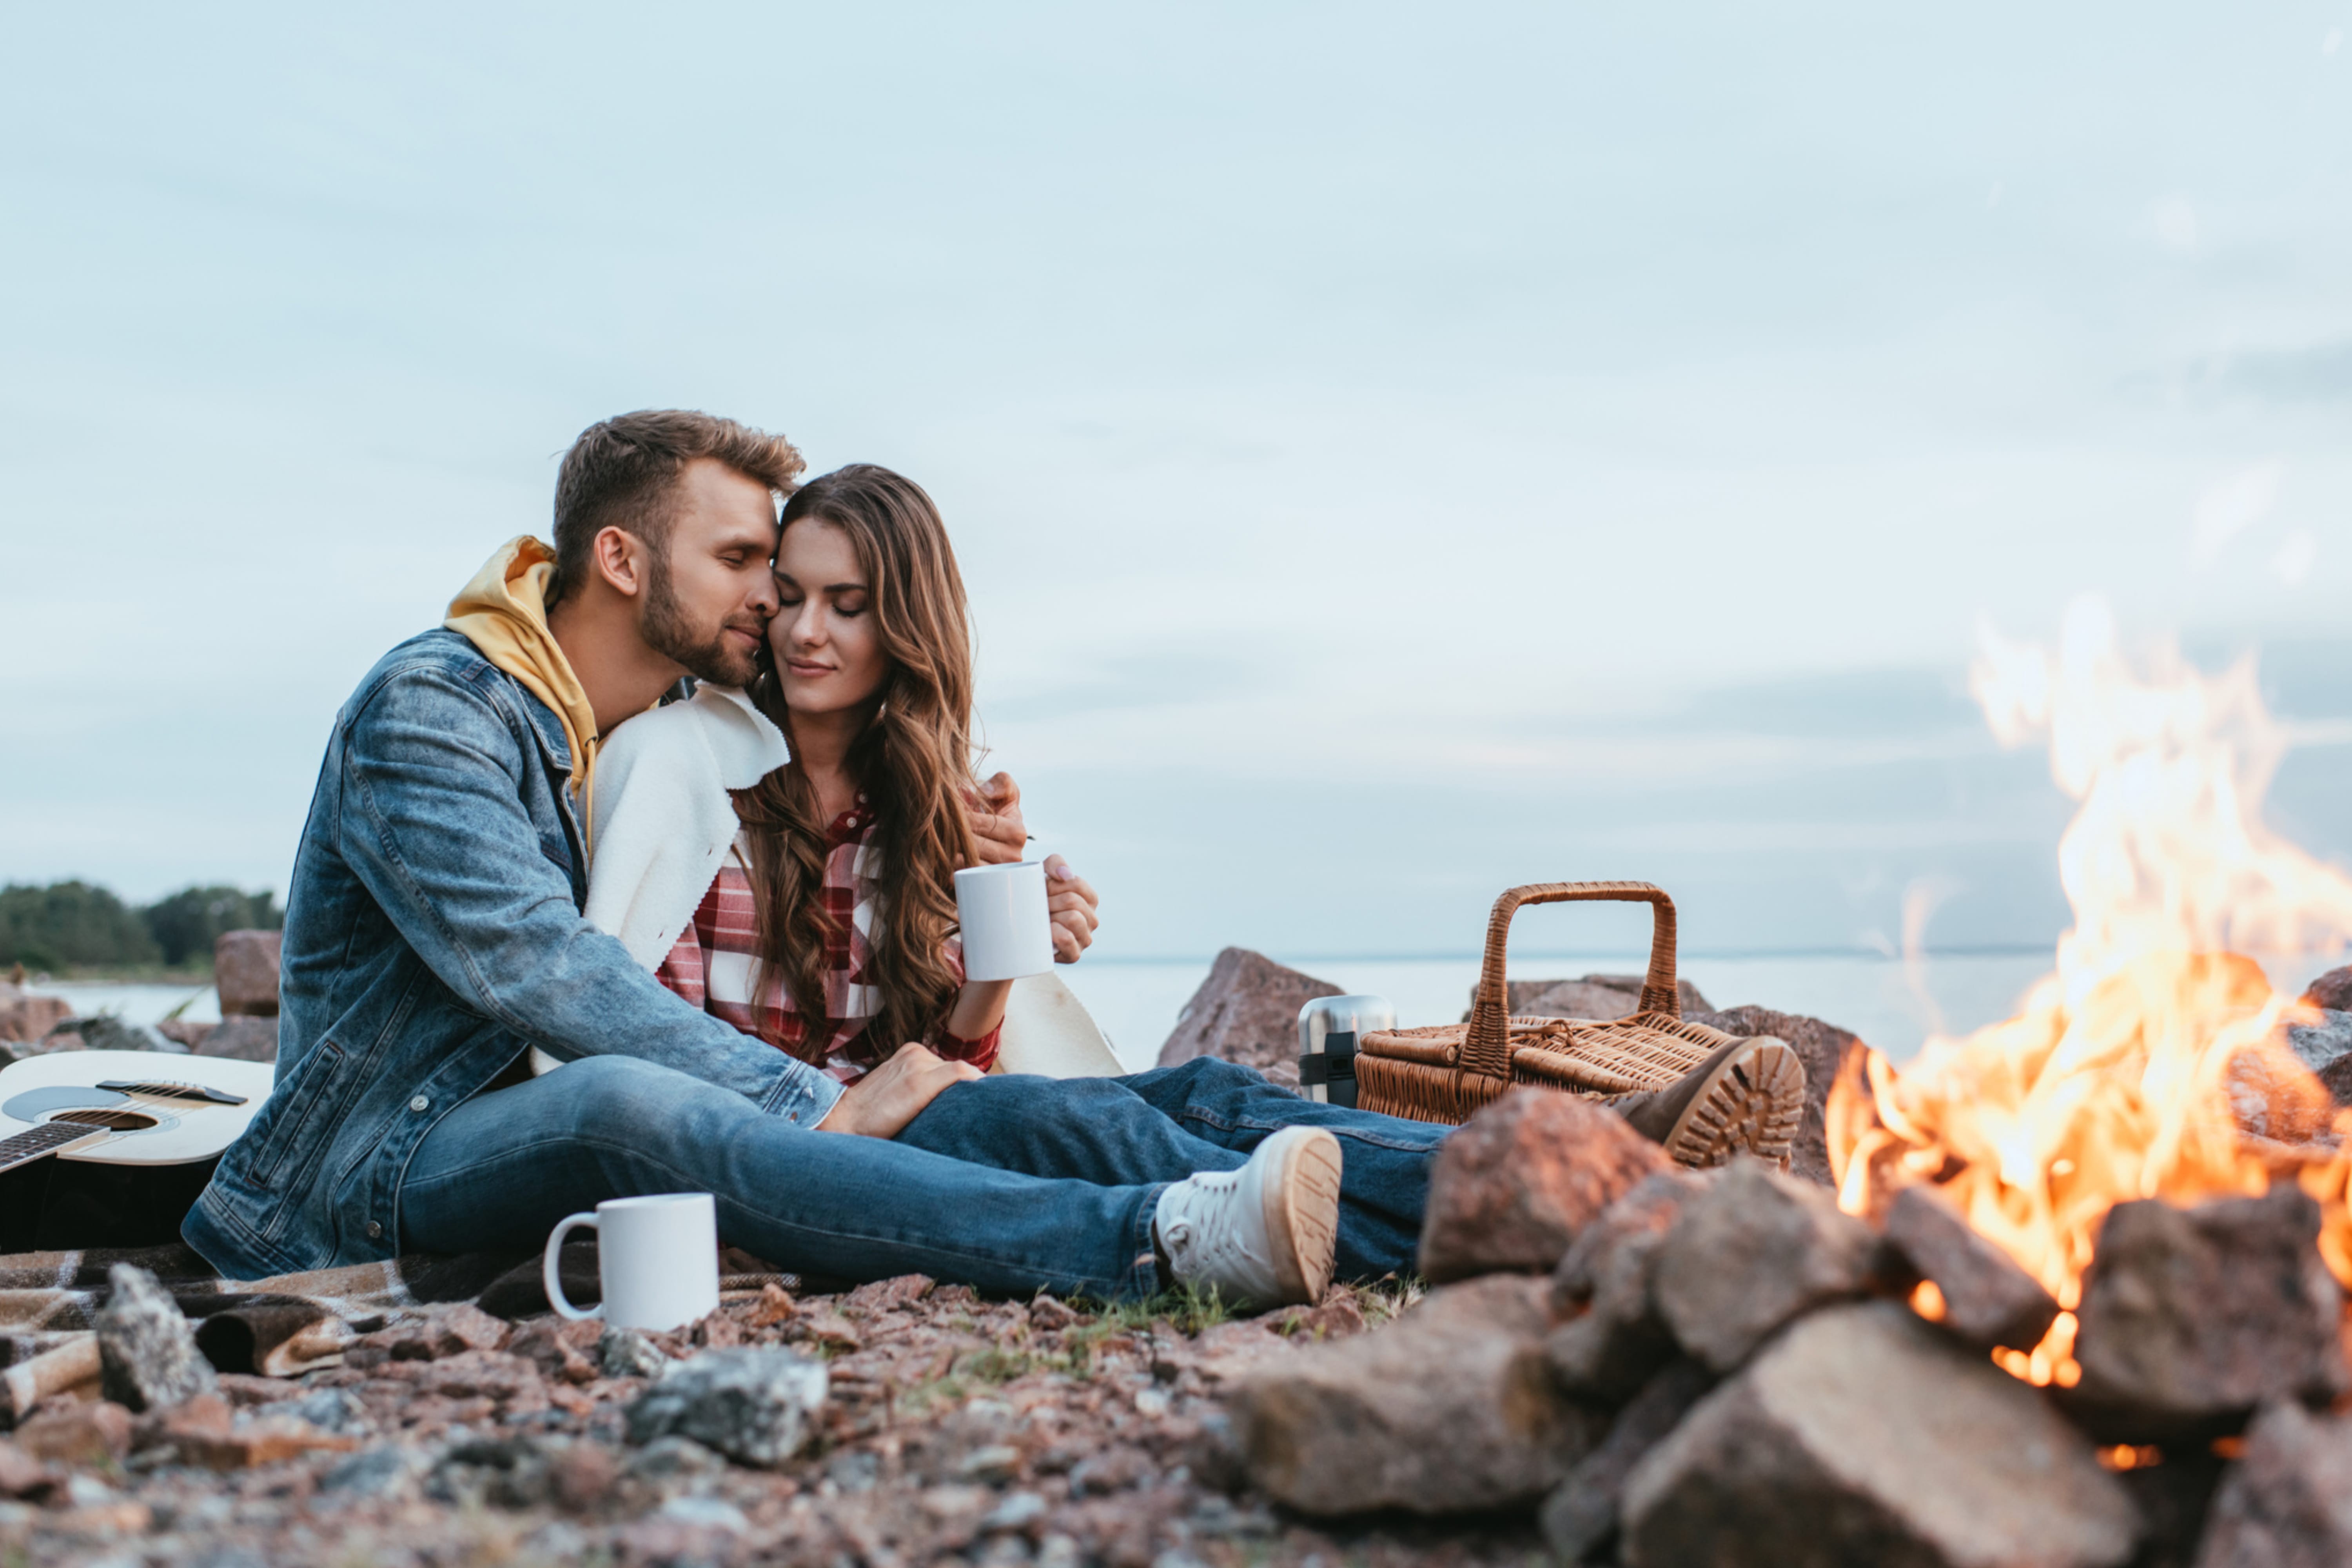 10 Unexpected Signs You’ve Found Your Perfect Match